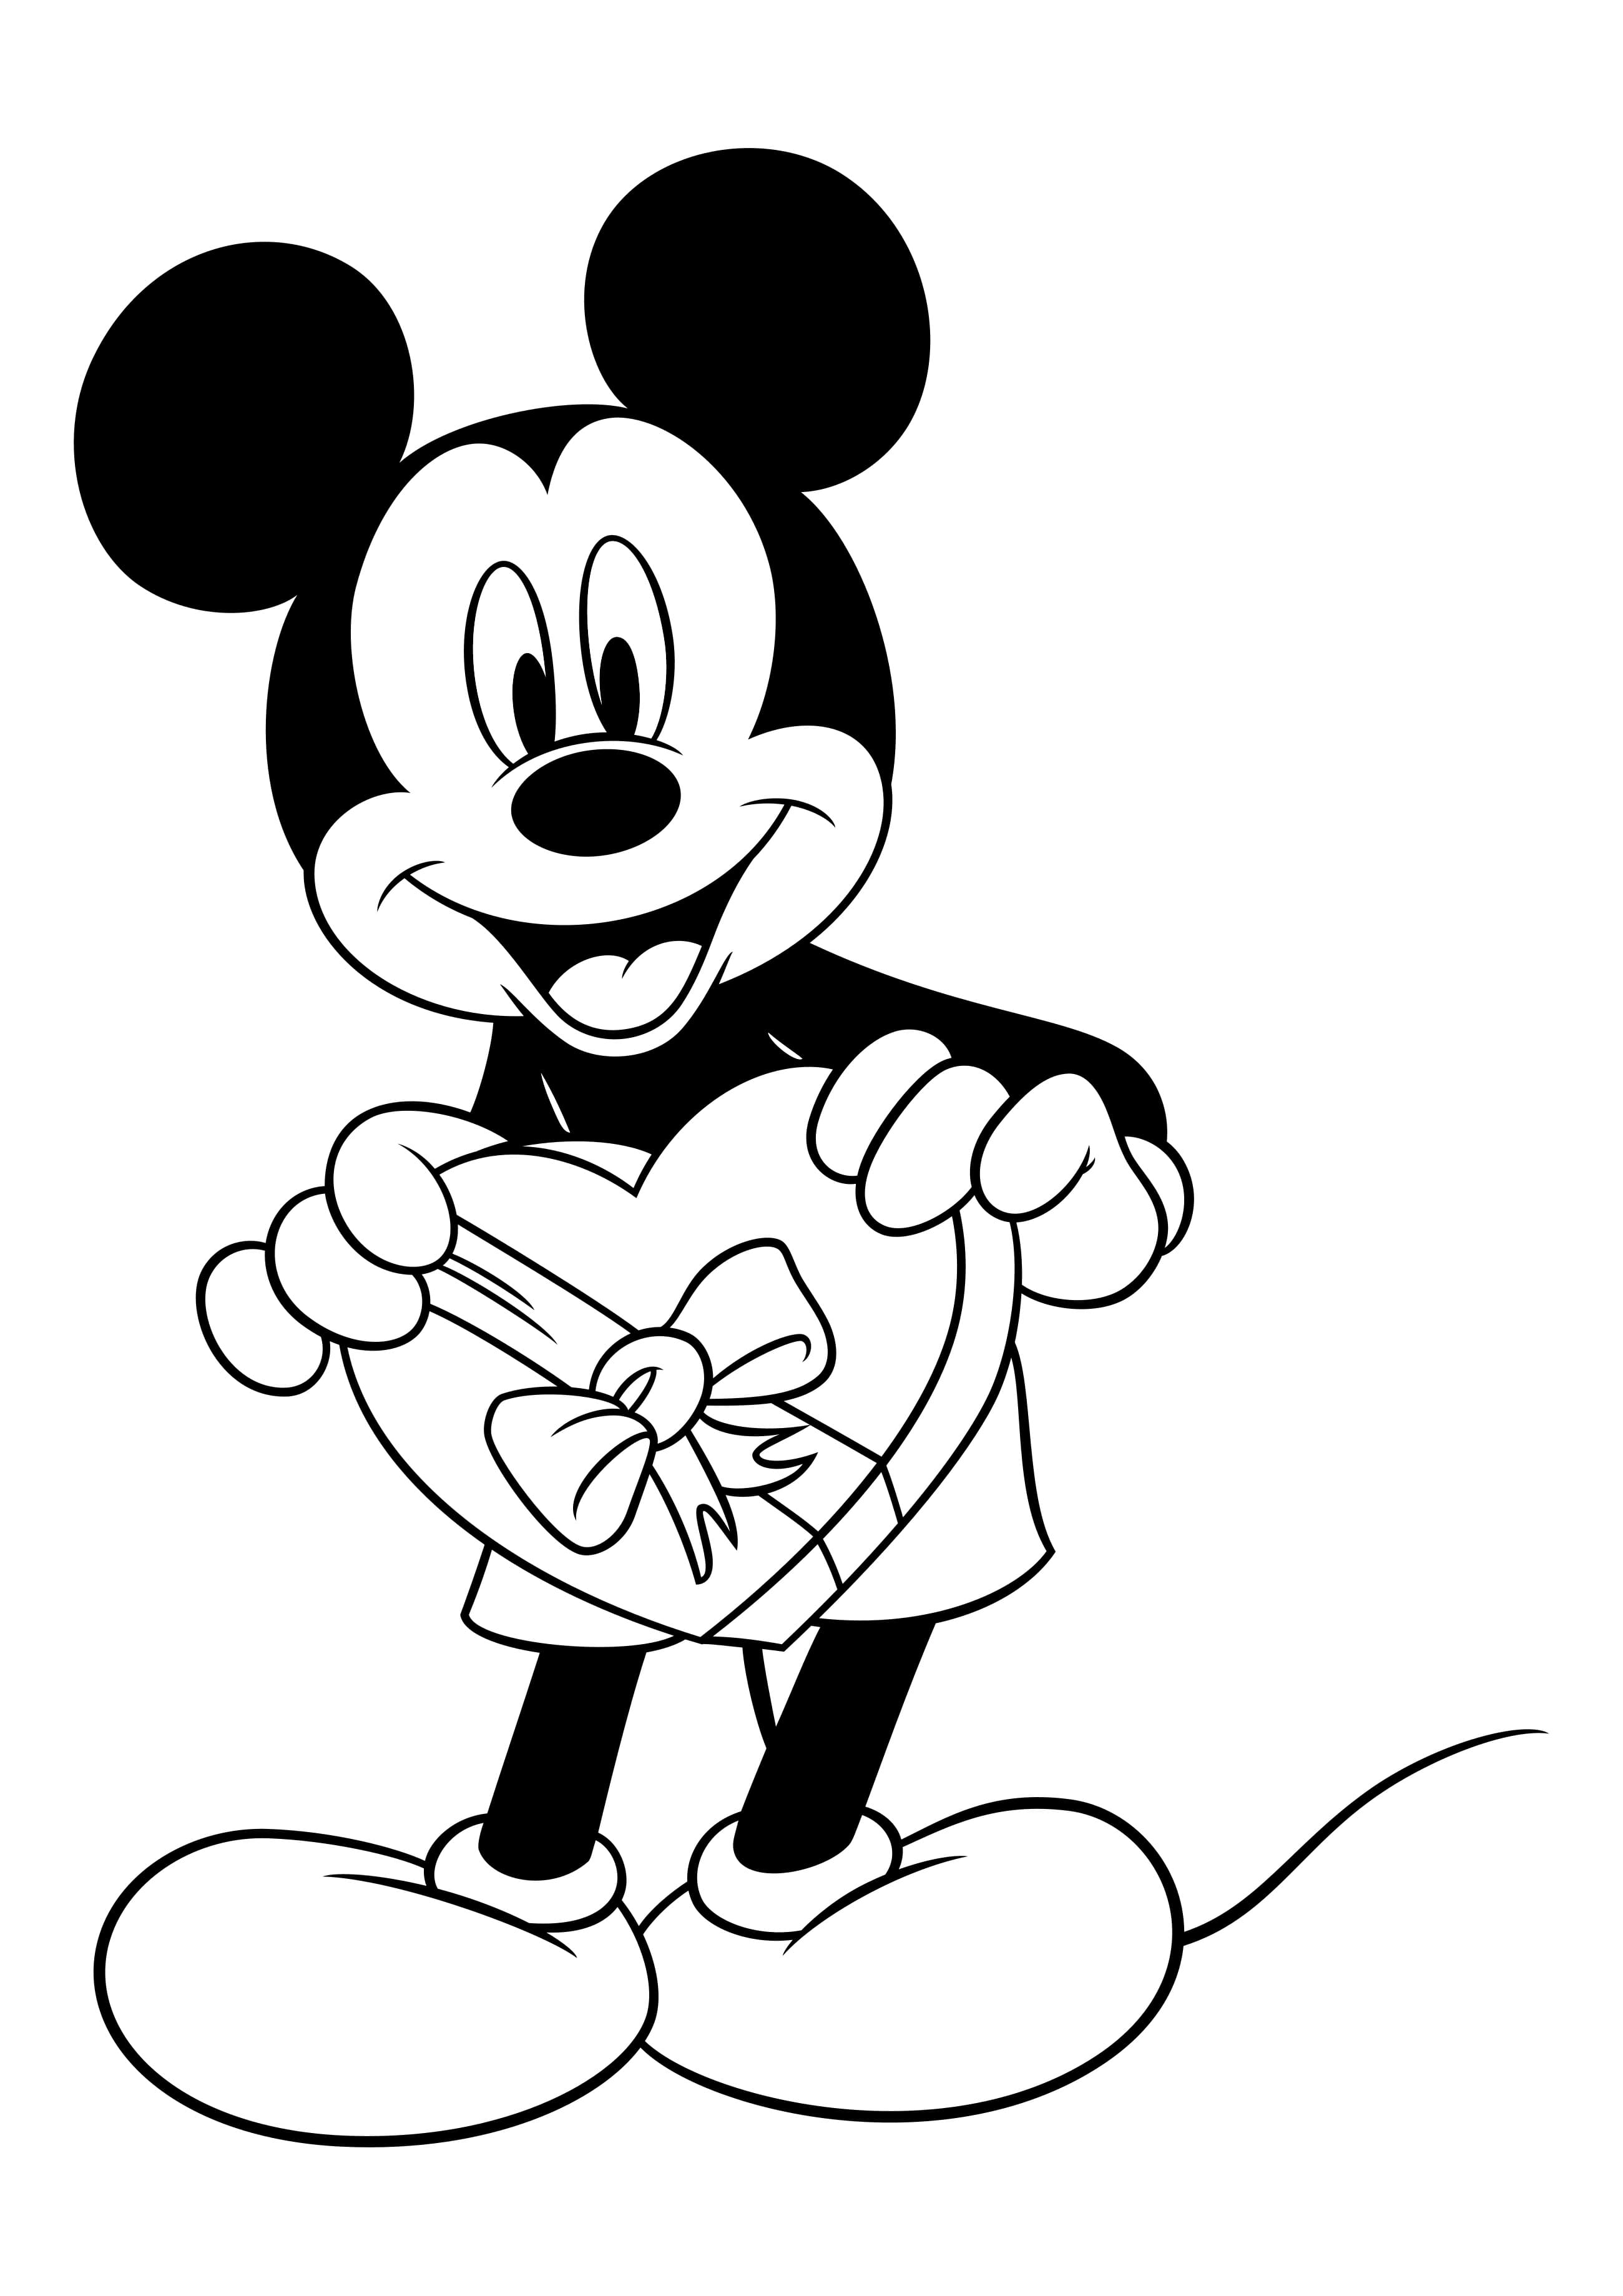 Coloring page Valentine's Day Mickey Mouse gives candy to Minnie Mouse